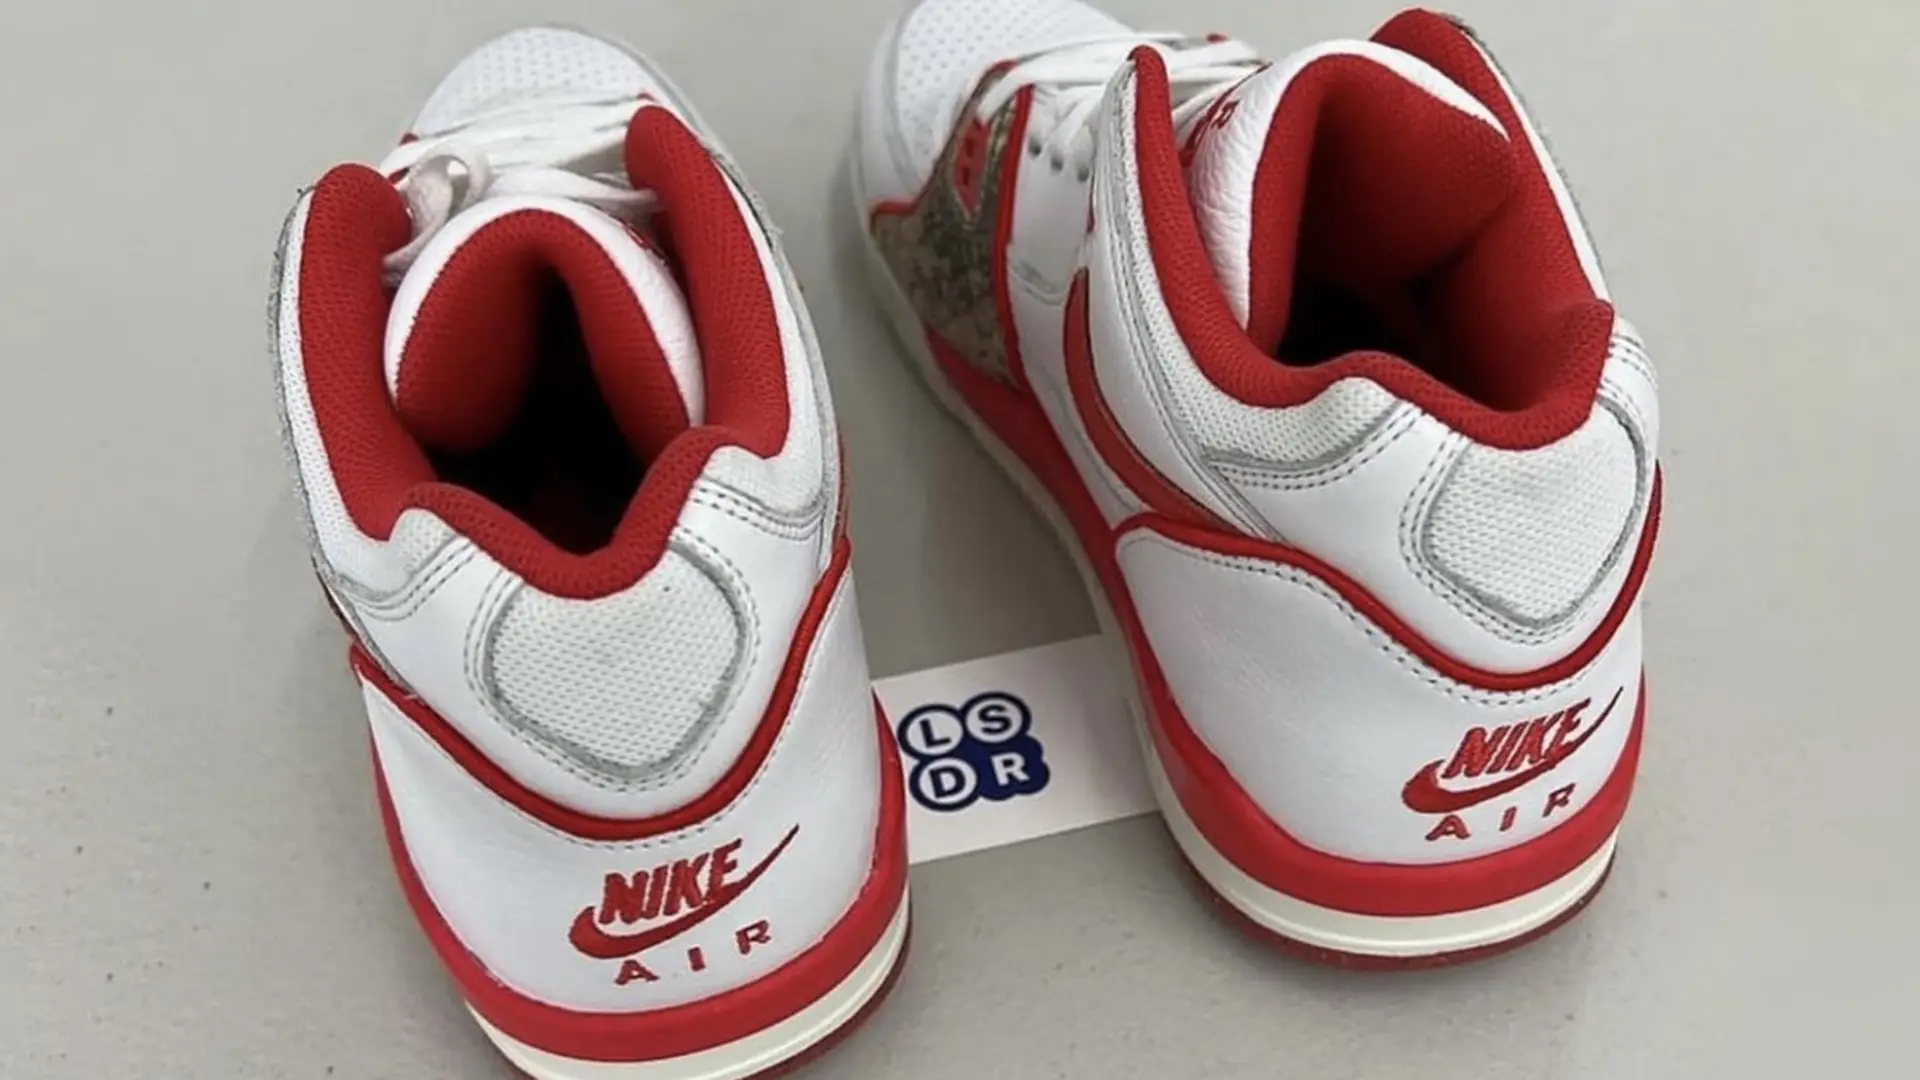 Here's An Official Look at the Stüssy x Nike Air Flight 89 Collab | The ...